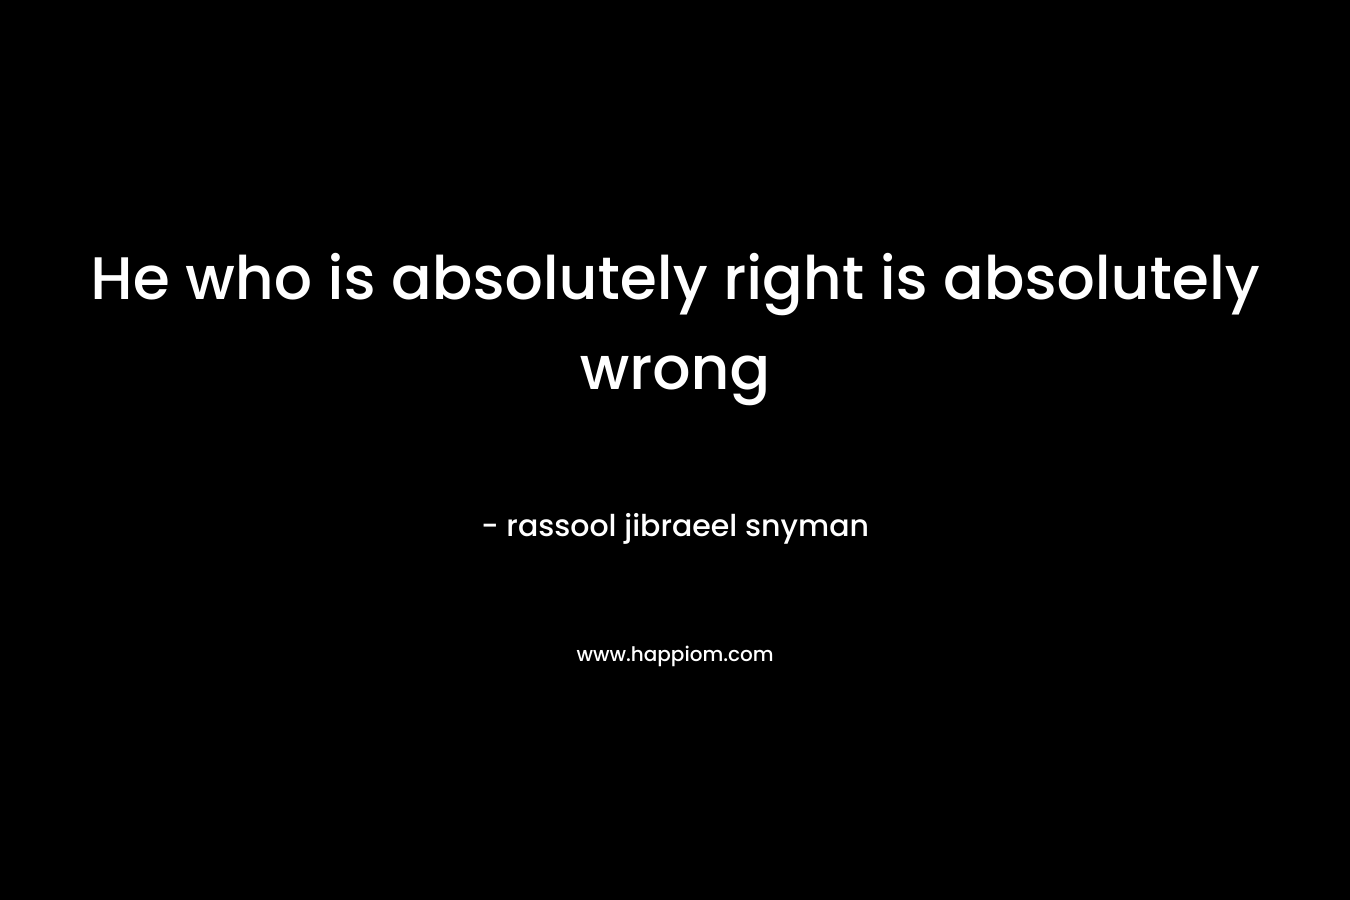 He who is absolutely right is absolutely wrong